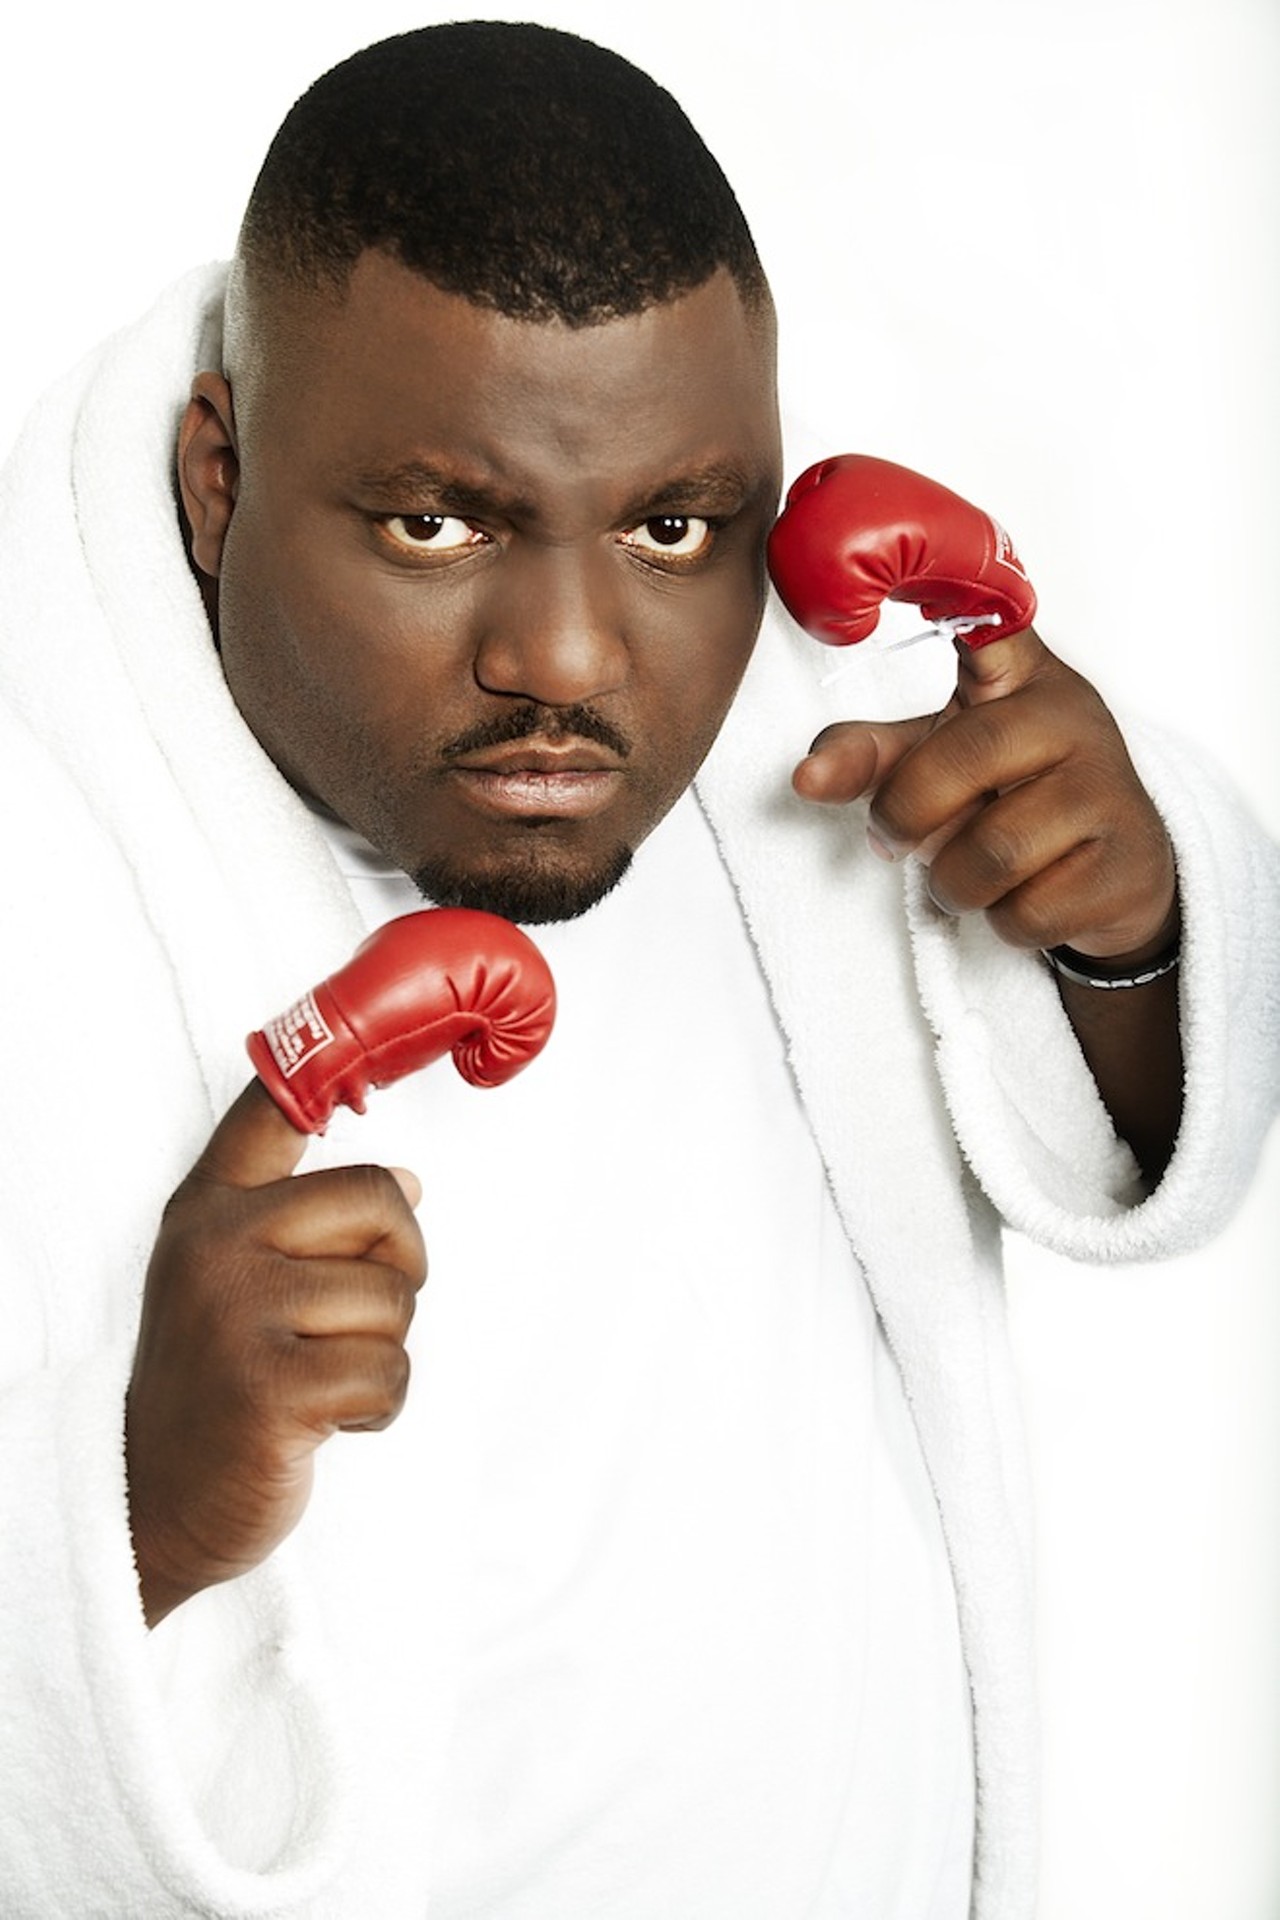 Thursday, March 5-Sunday, March 8Aries Spears